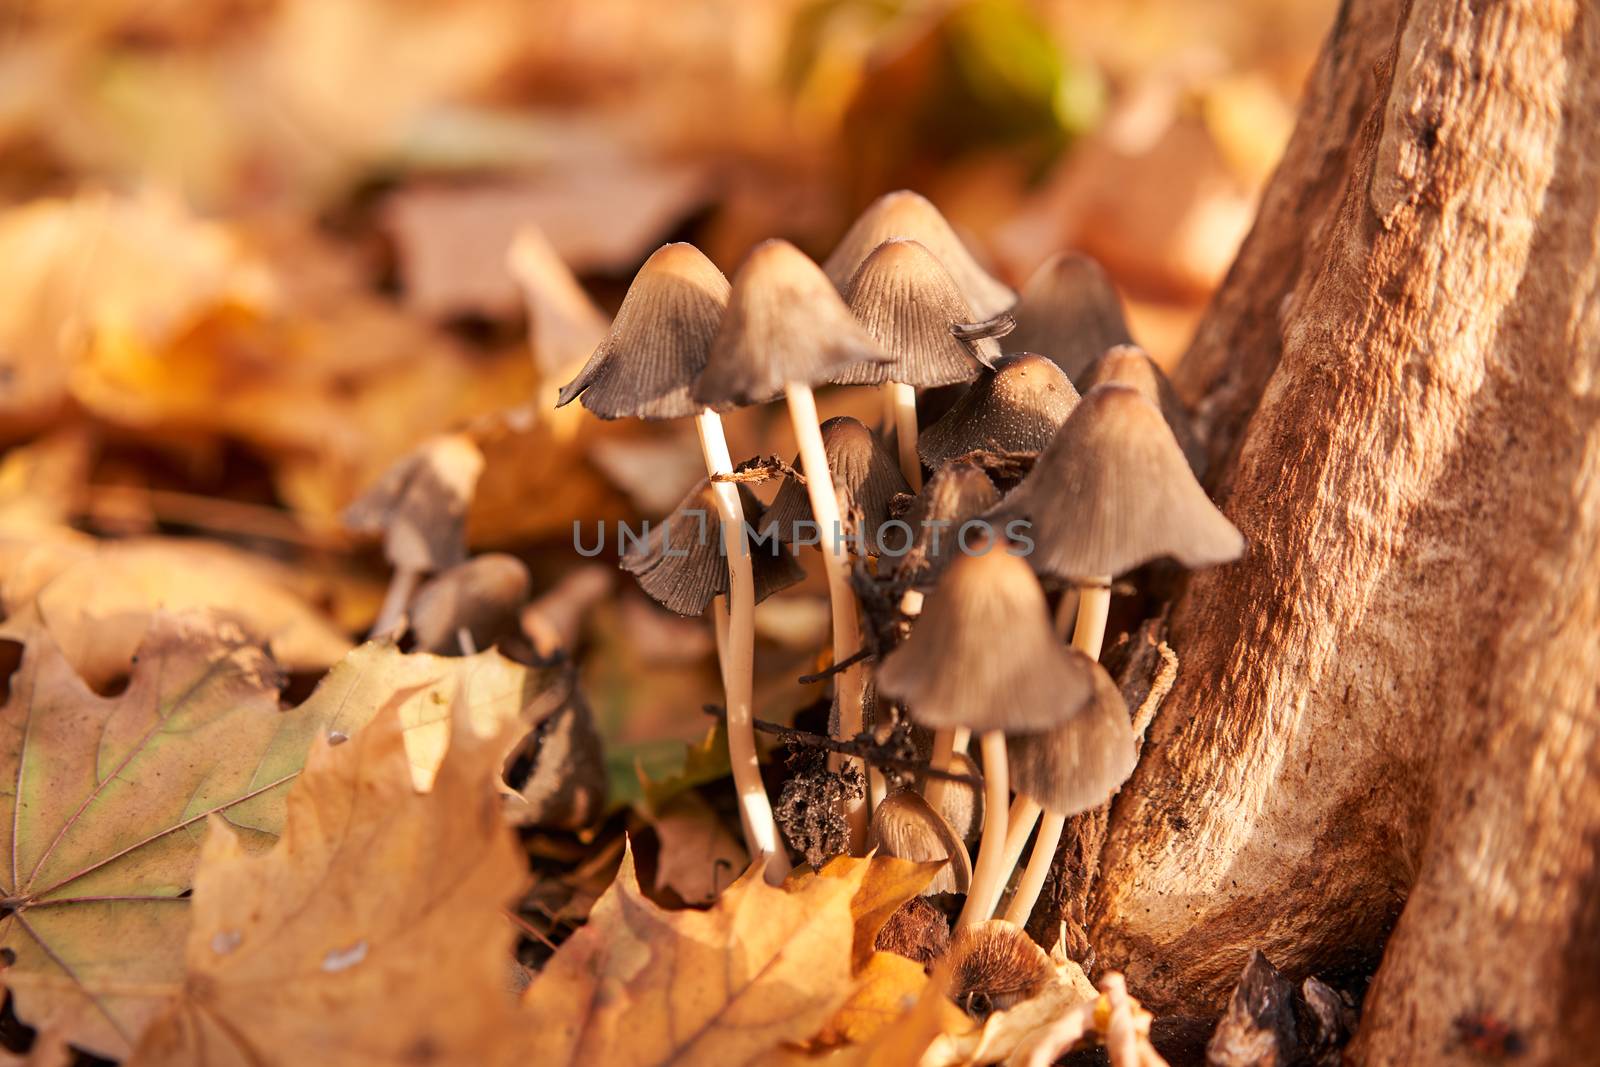 Poisonous mushrooms group grow in autumn leaves near the tree. by andreonegin